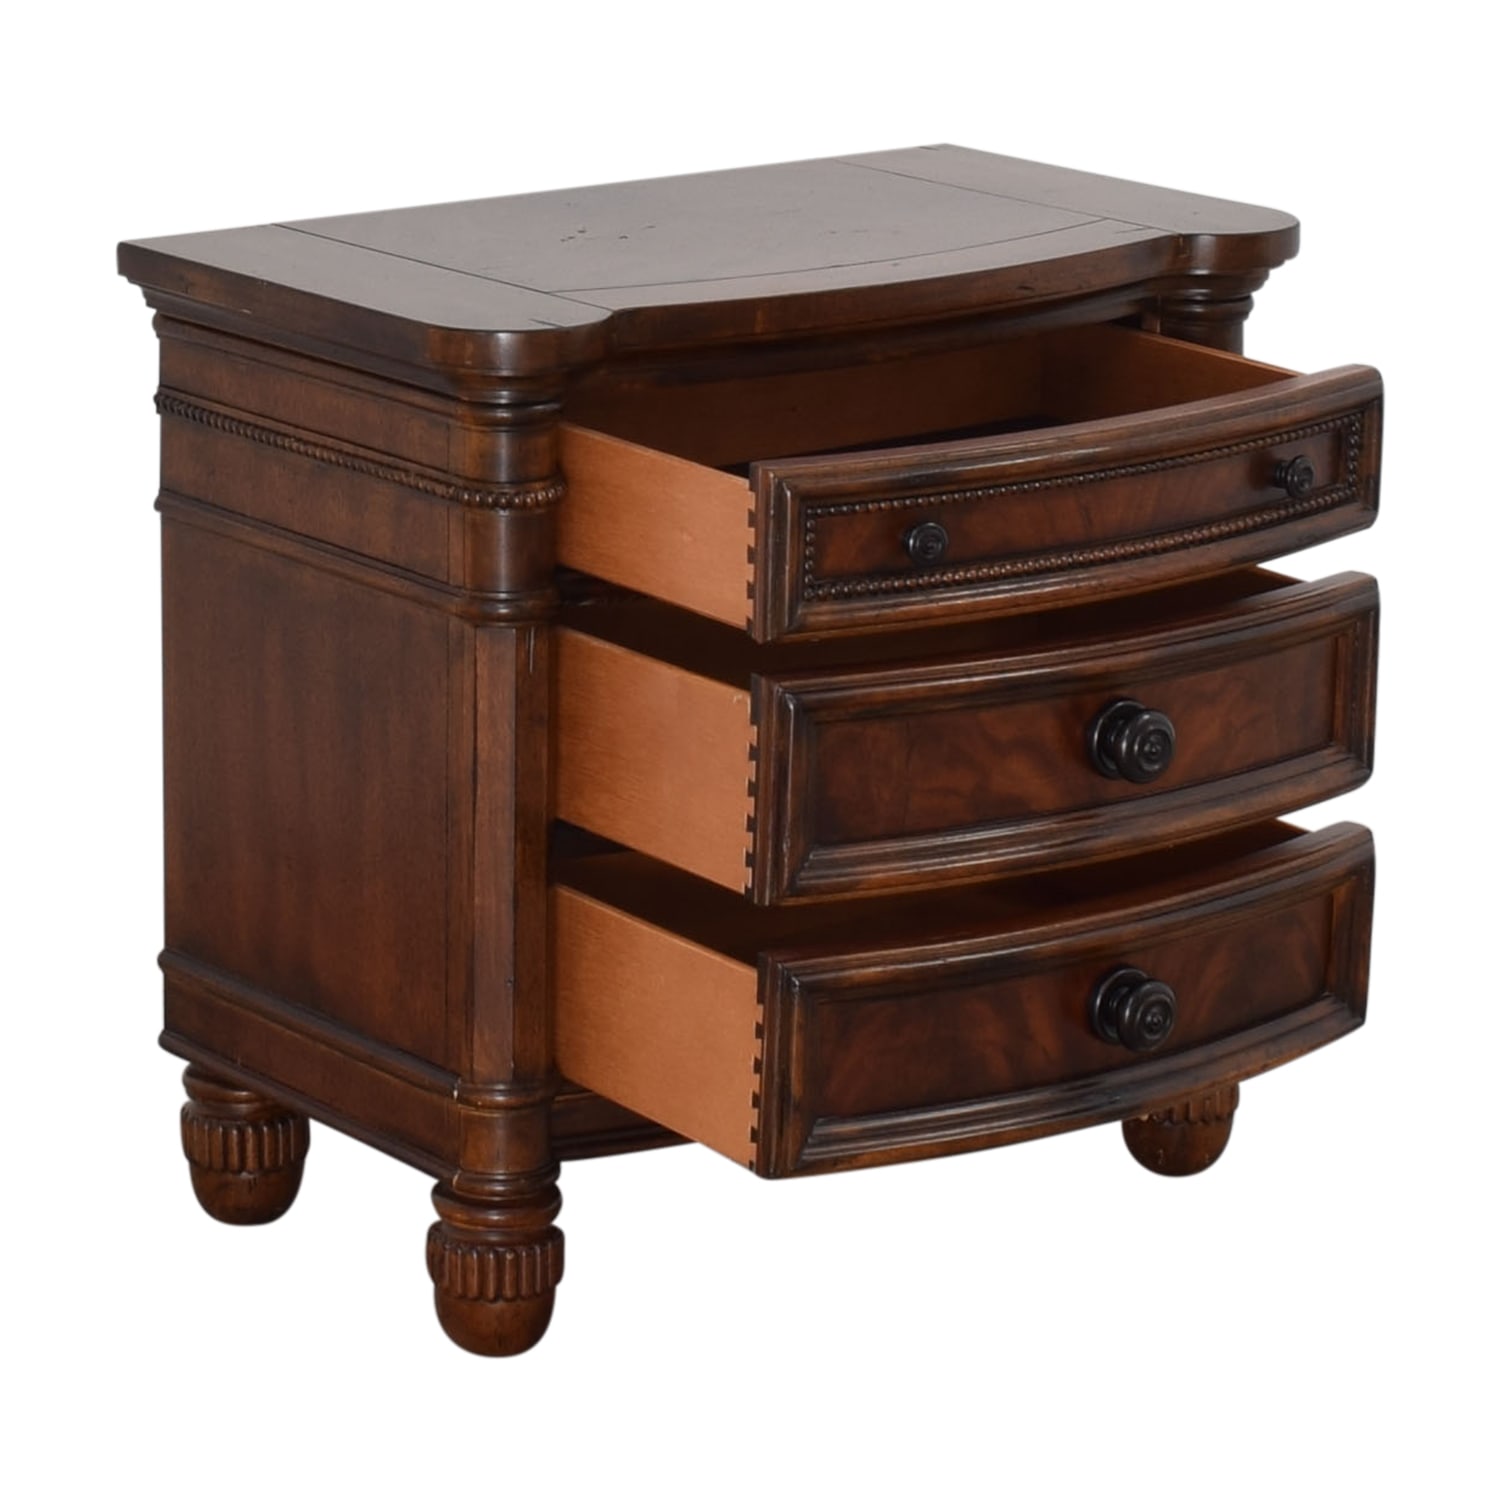 Broyhill Furniture Broyhill Furniture Night Stand second hand